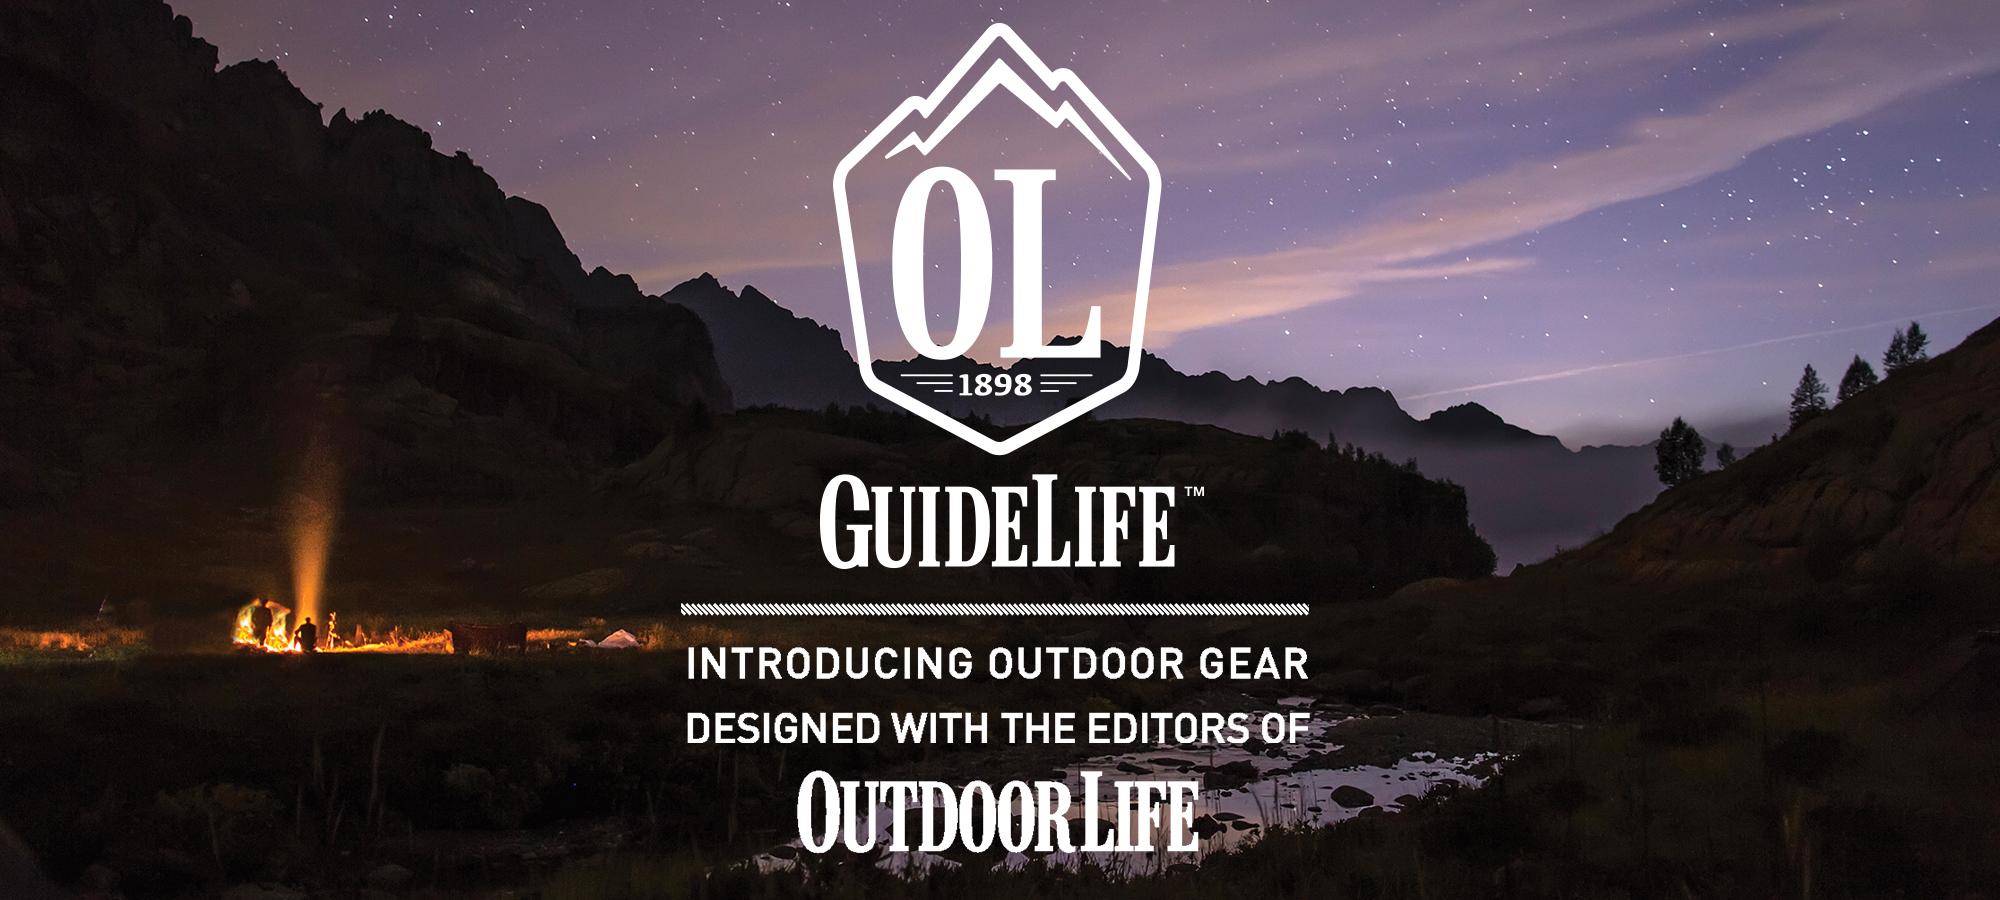 Introducing Guide Life